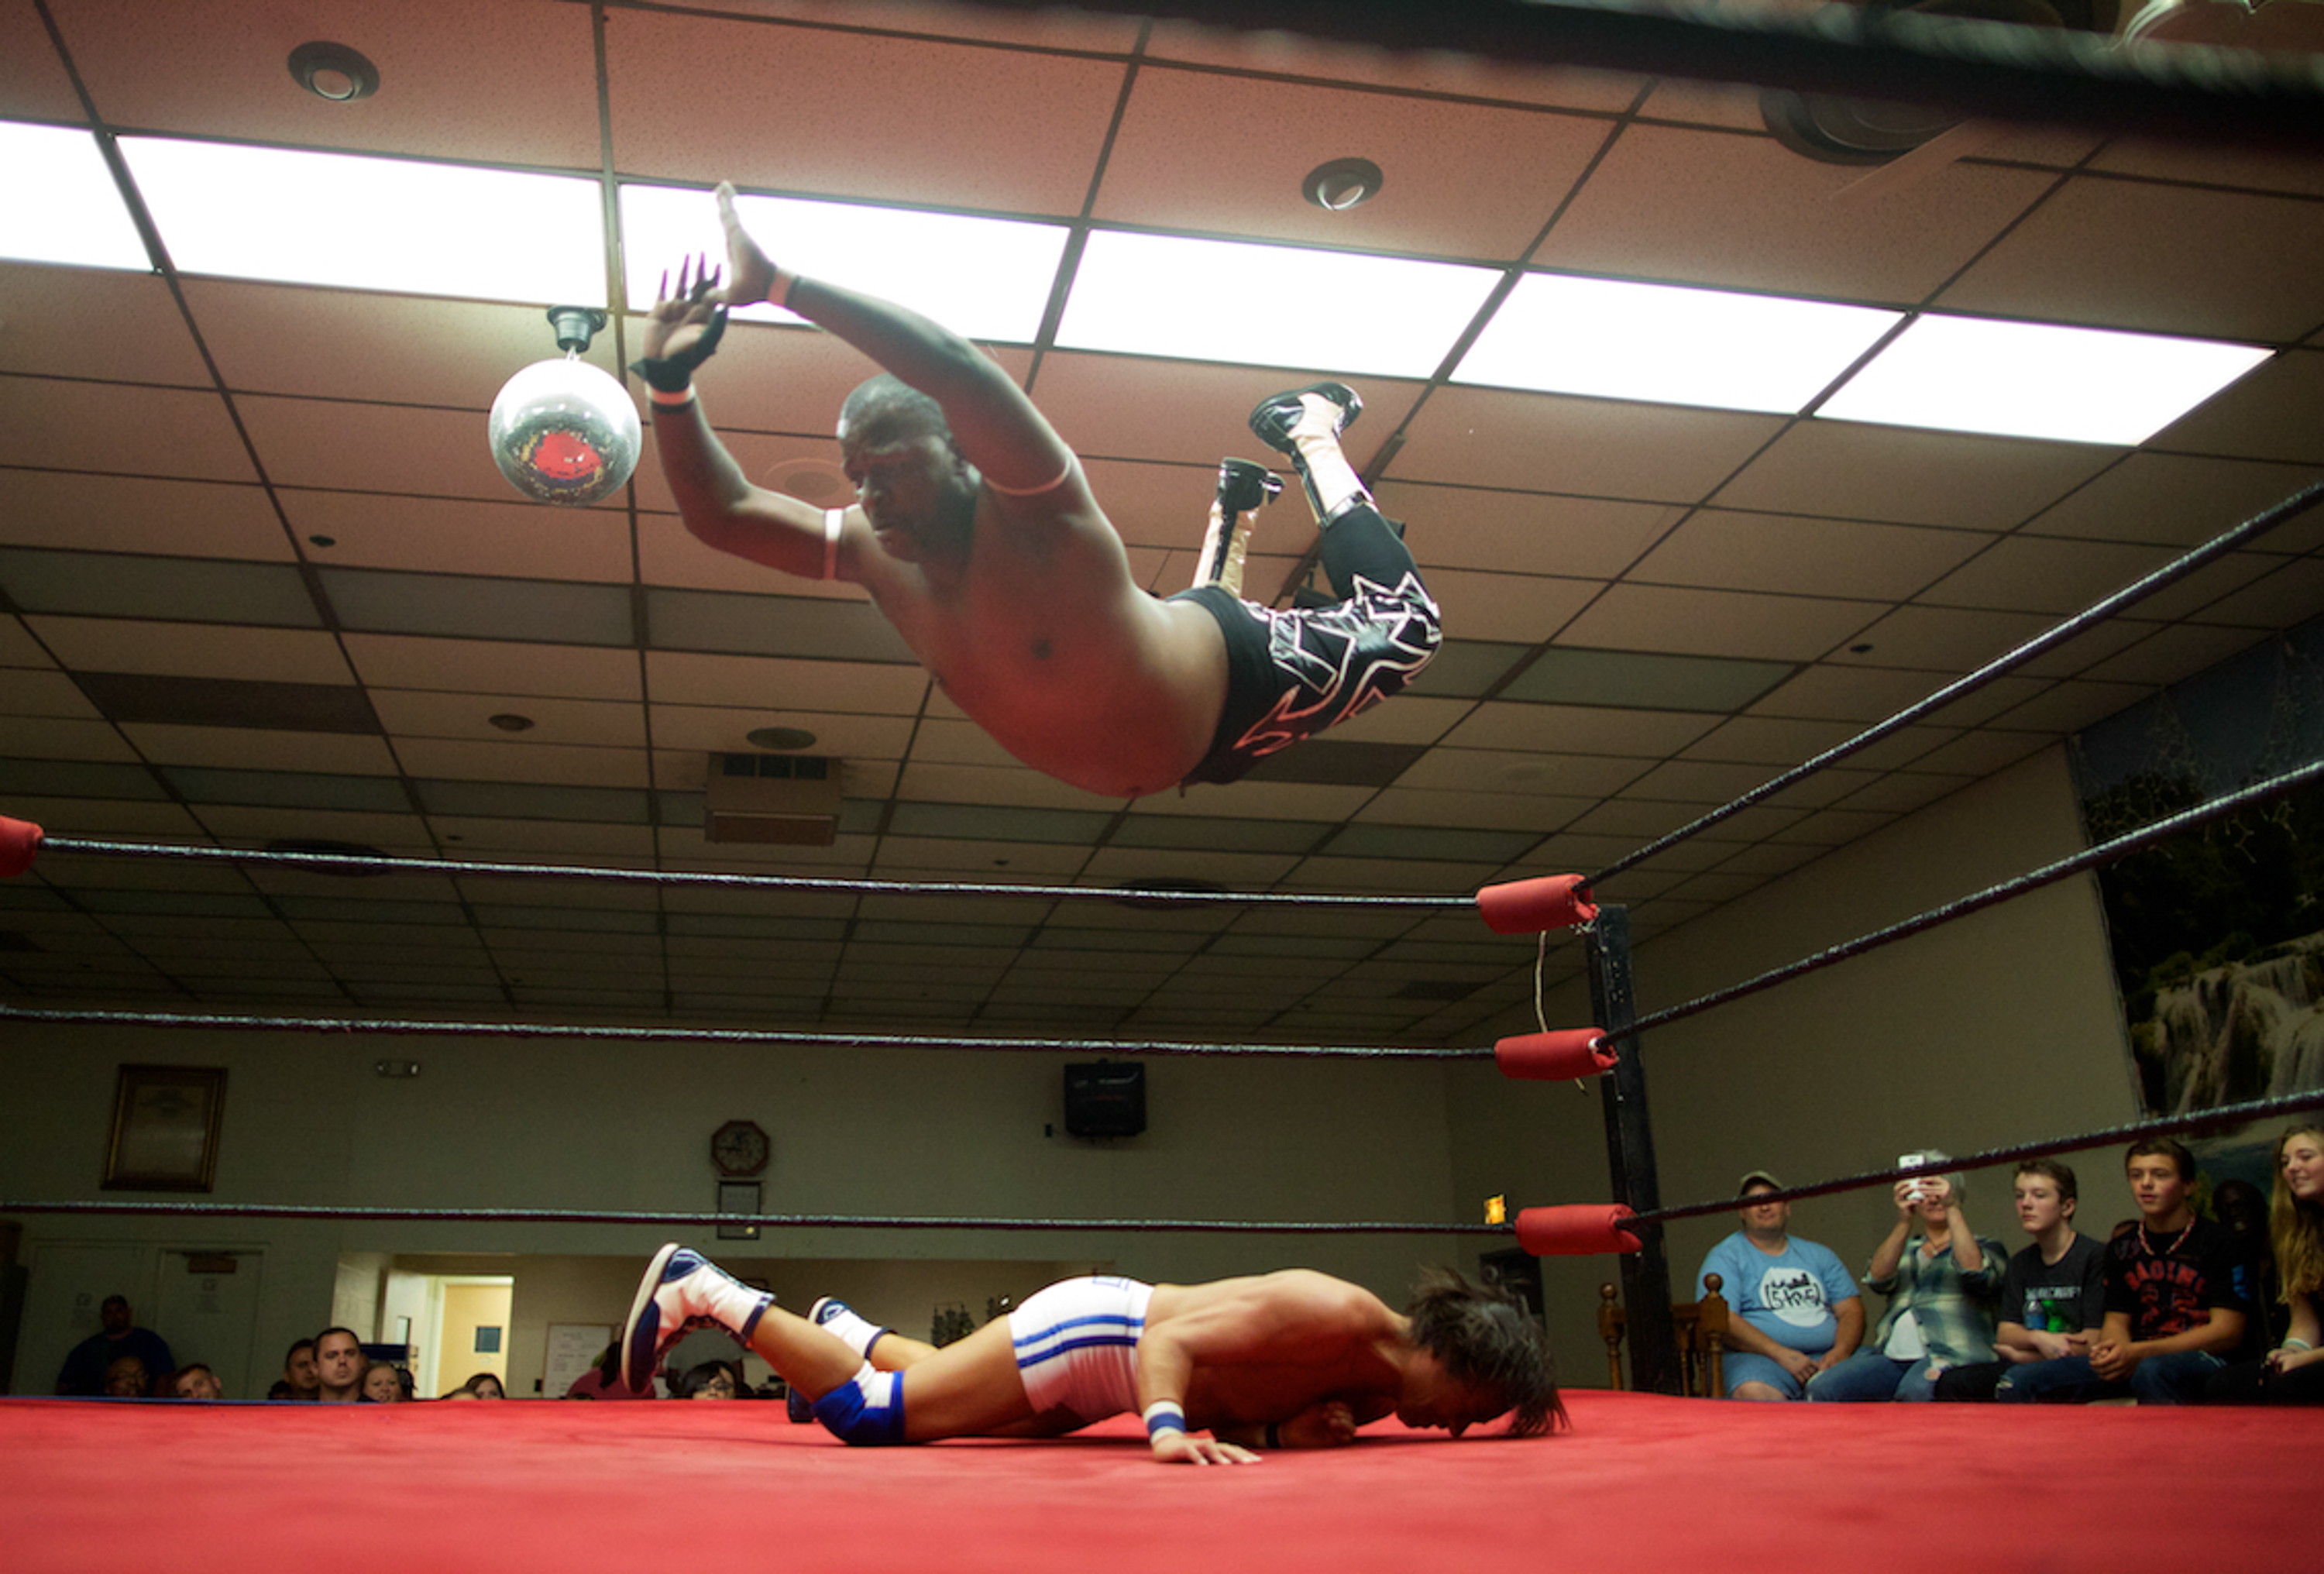 9/21/13 - At the Eagles Club in Rochester, NY Professional Wrestler Gabrael Saint leaps from the ropes onto his Japanese opponent Shoichi Funaki. Photo by Joe Philipson 